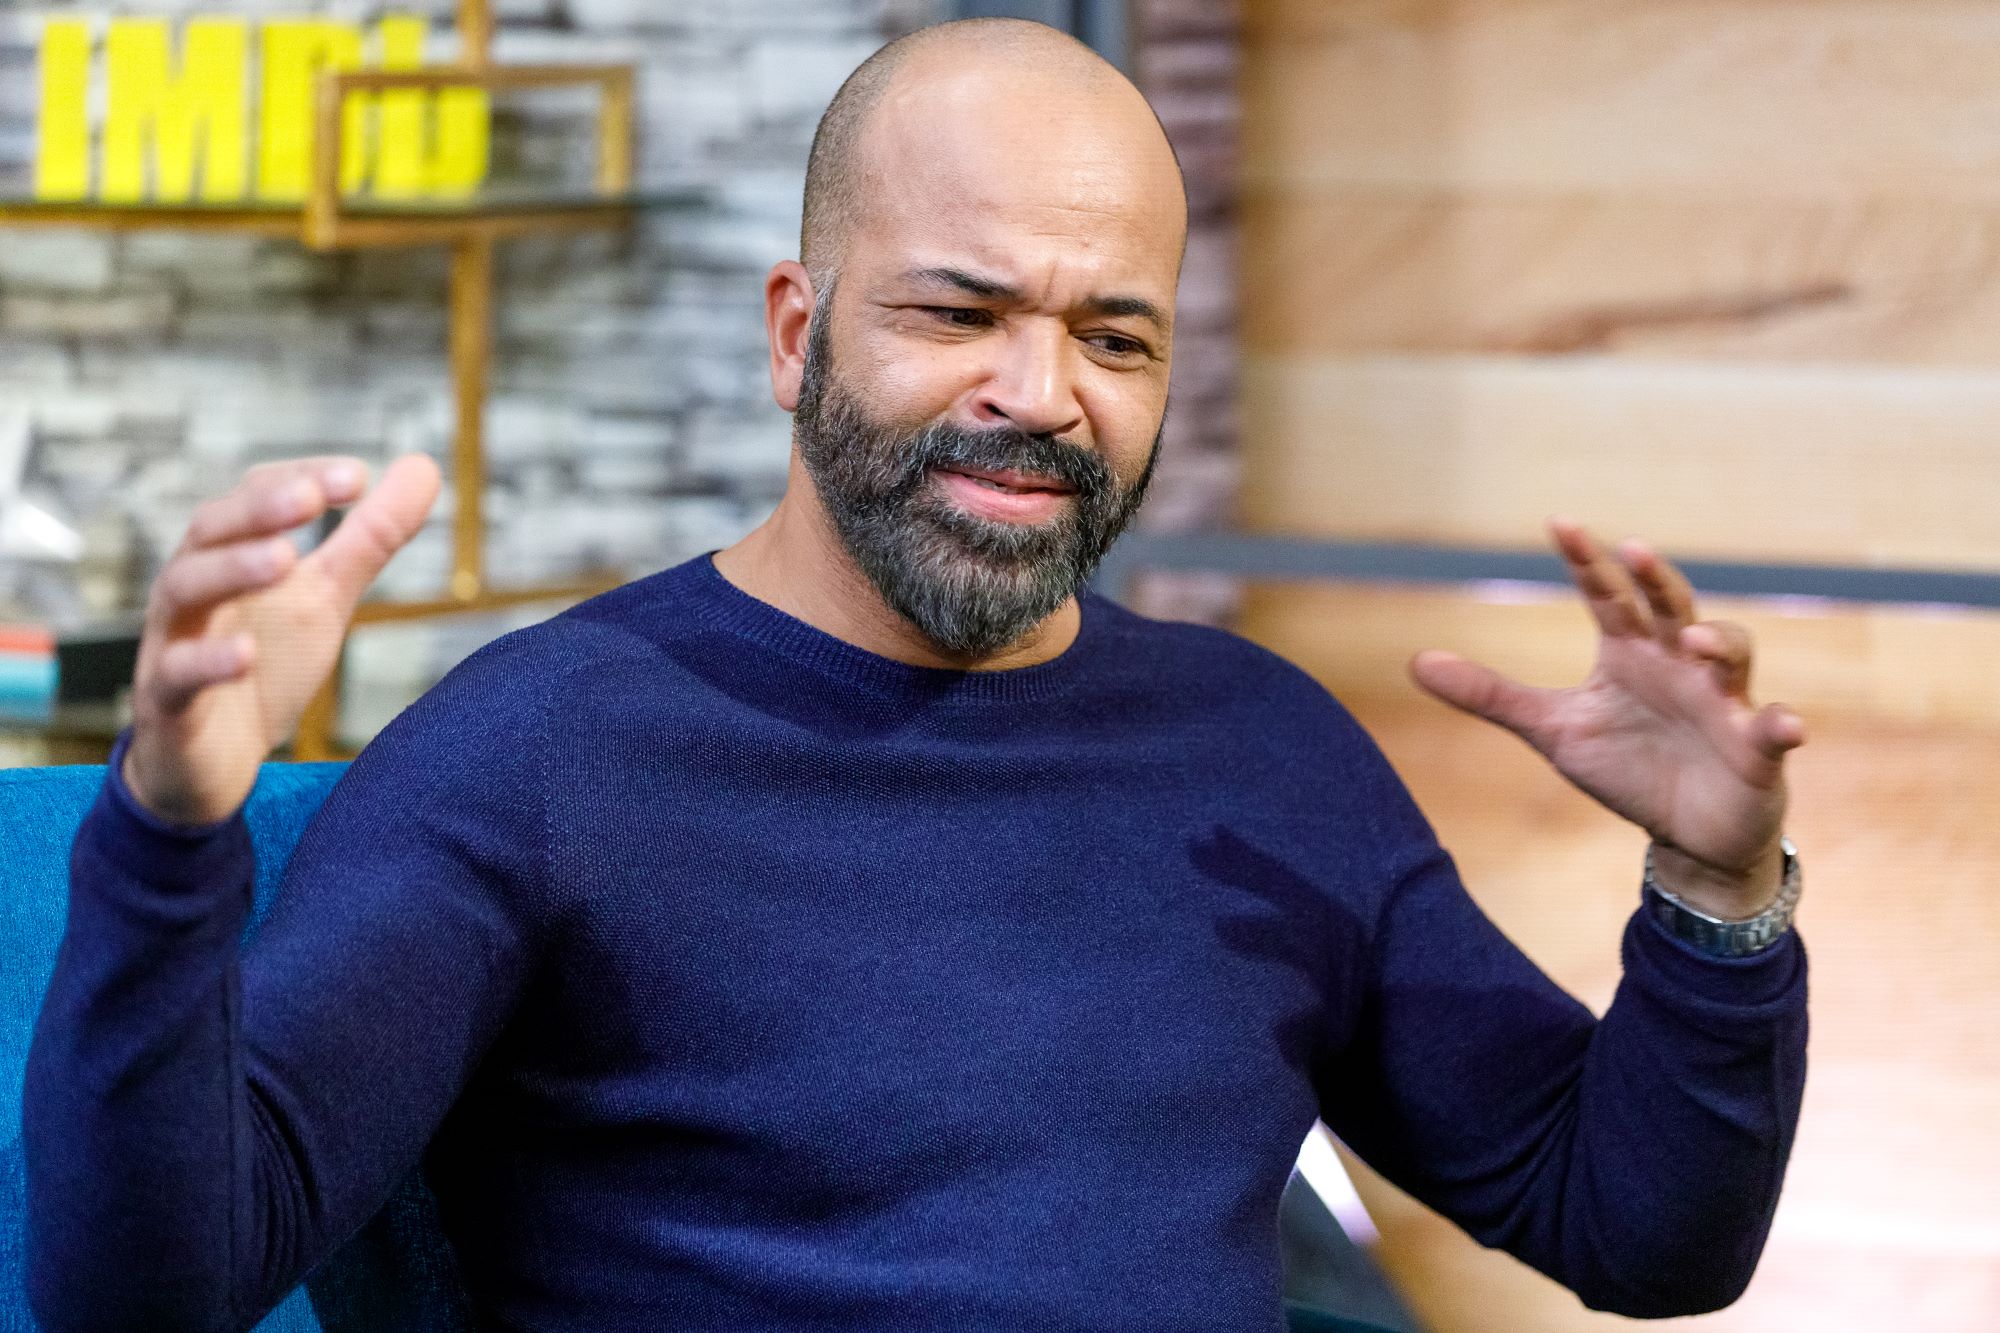 'What If...?' Episode 8 actor Jeffrey Wright wears a blue long-sleeved shirt.